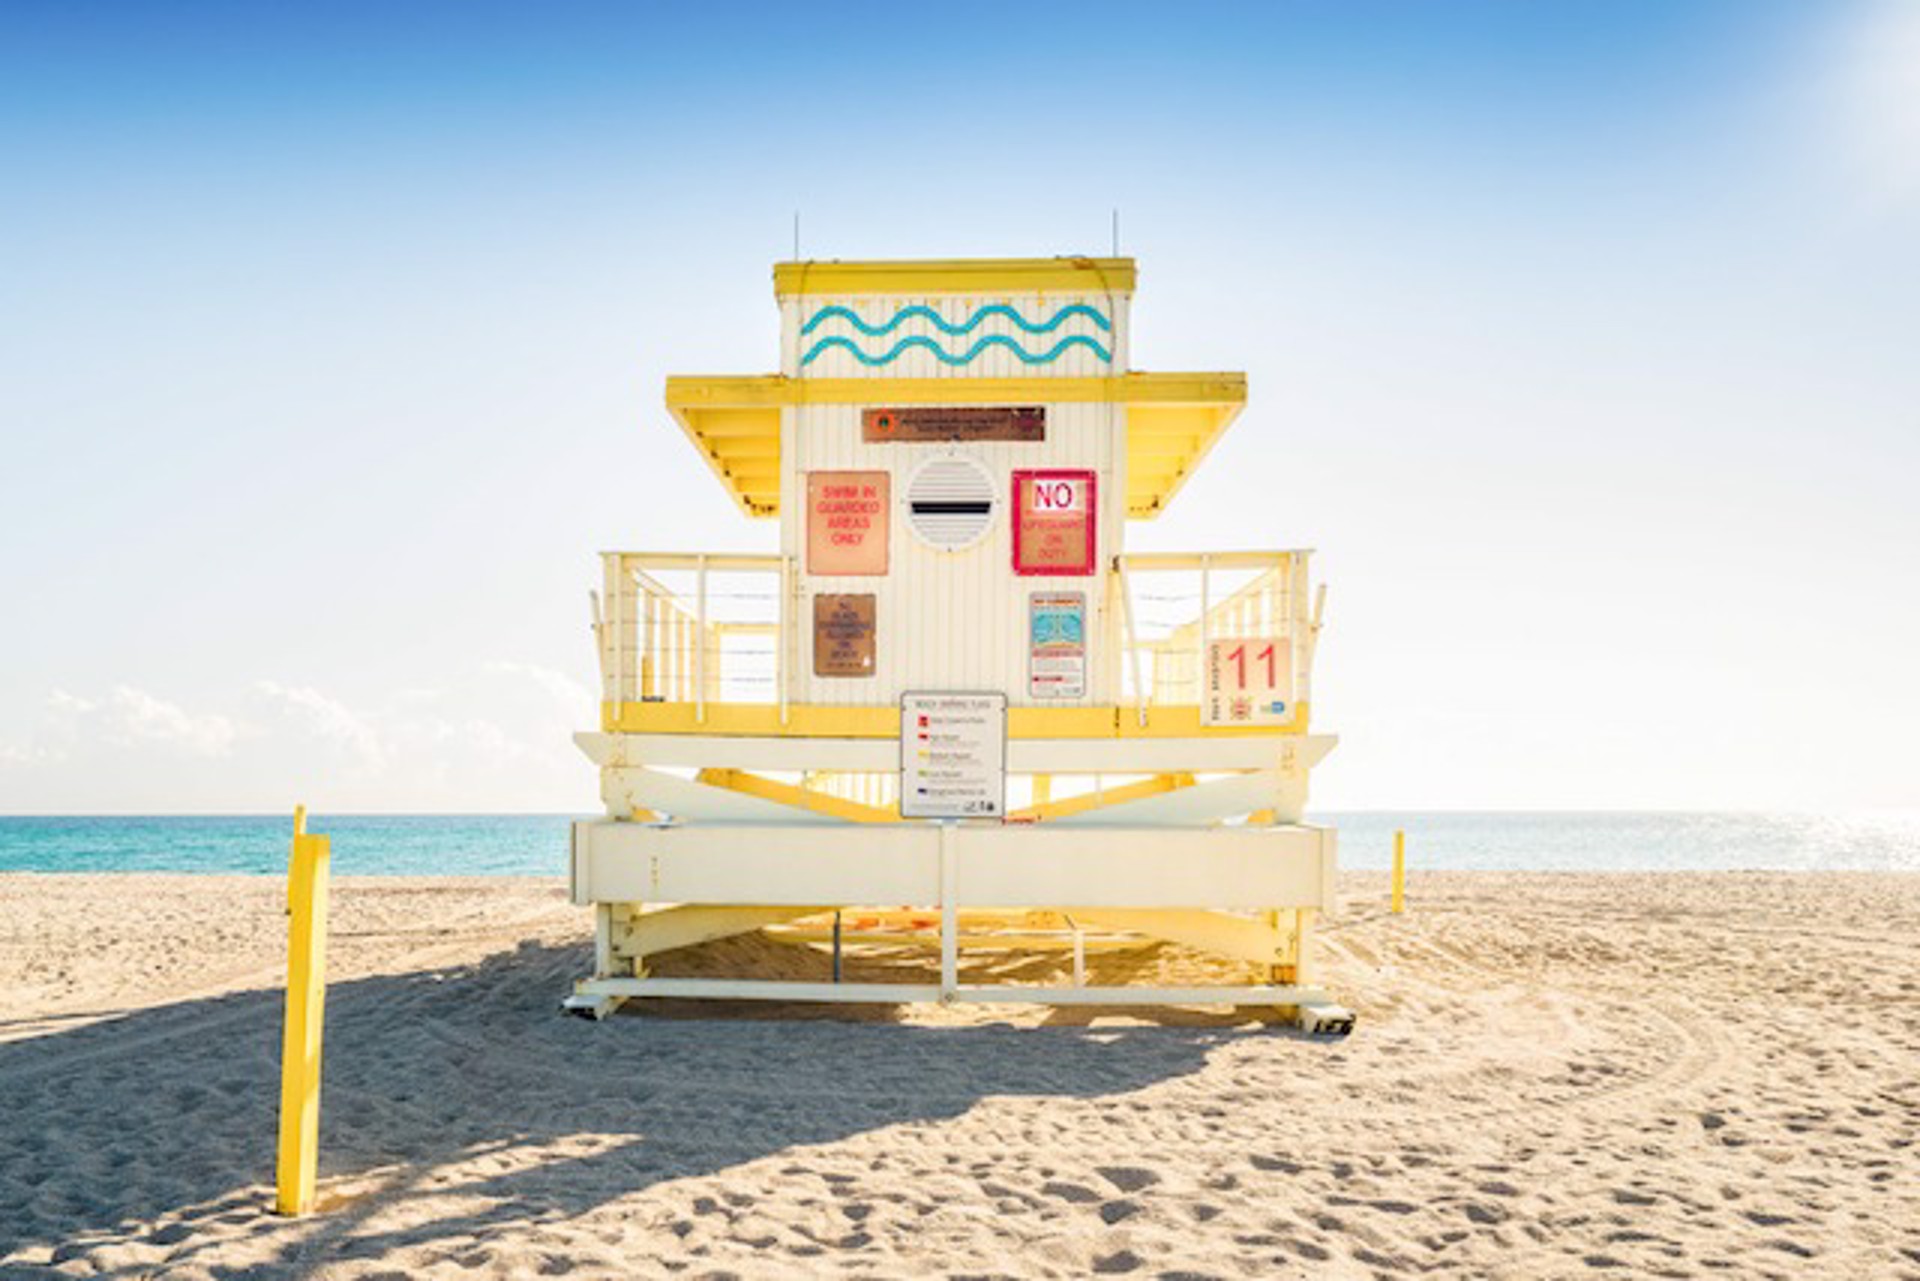 Haulover Beach Lifeguard Stand 11 by Peter Mendelson